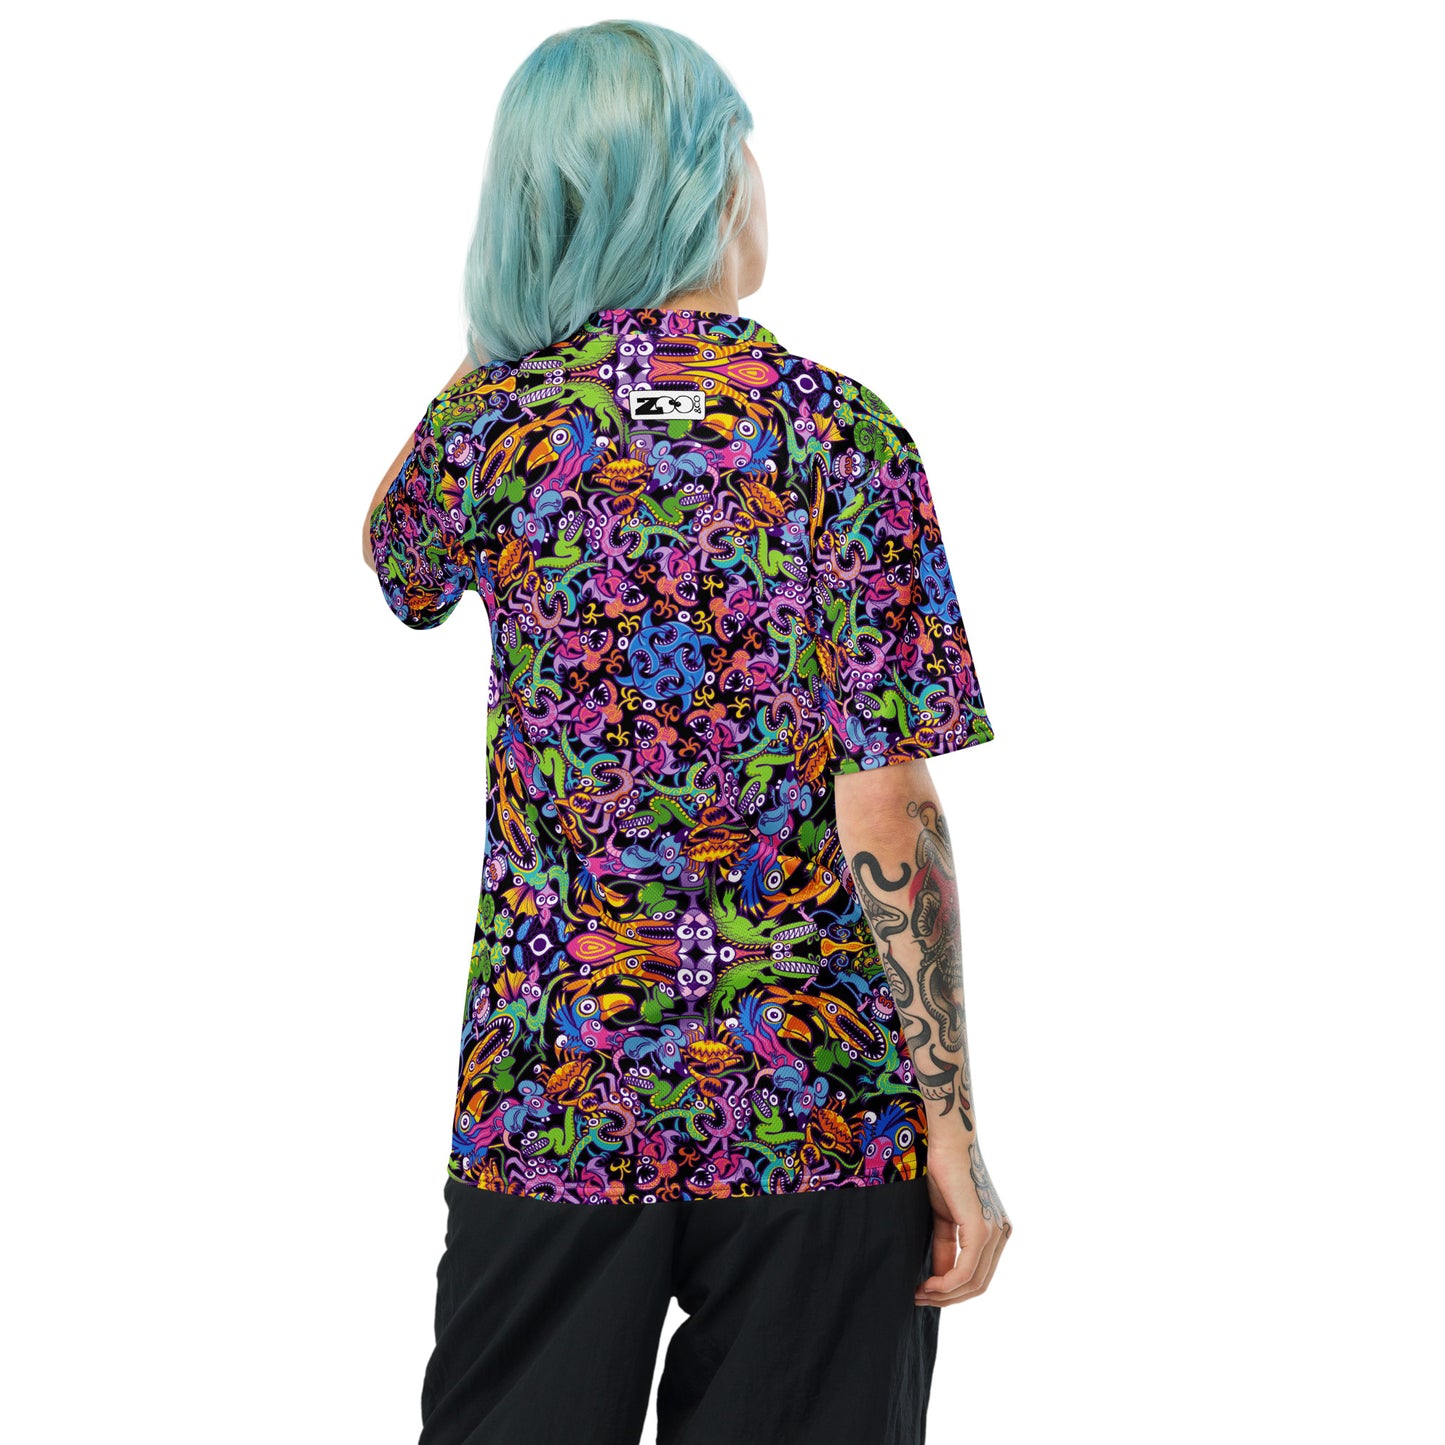 Eccentric critters in a lively crazy festival Recycled unisex sports jersey. Overview